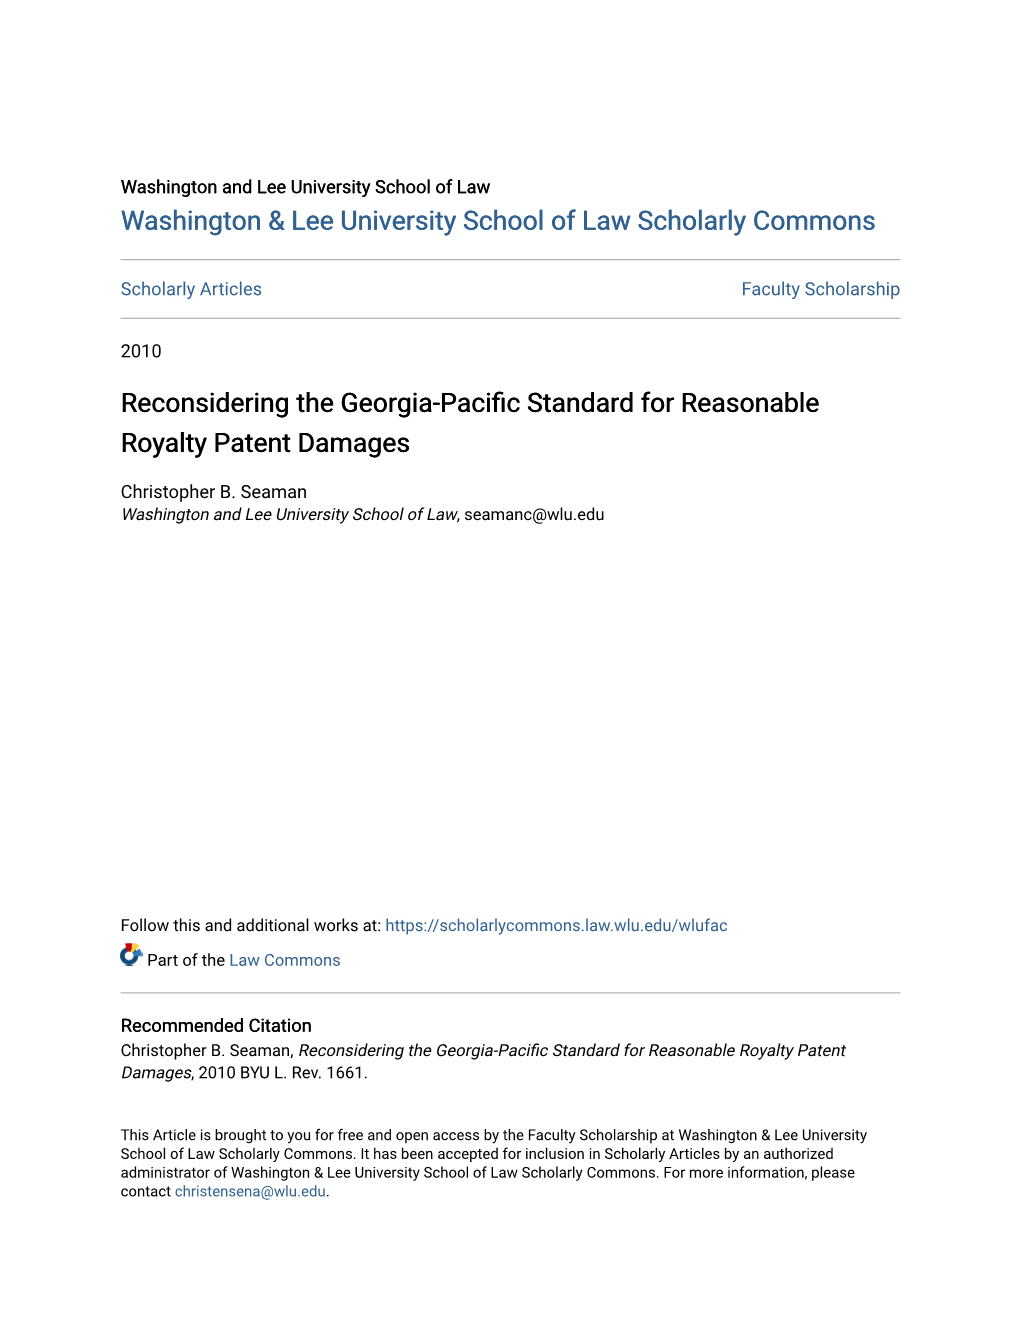 Reconsidering the Georgia-Pacific Standard for Reasonable Royalty Patent Damages